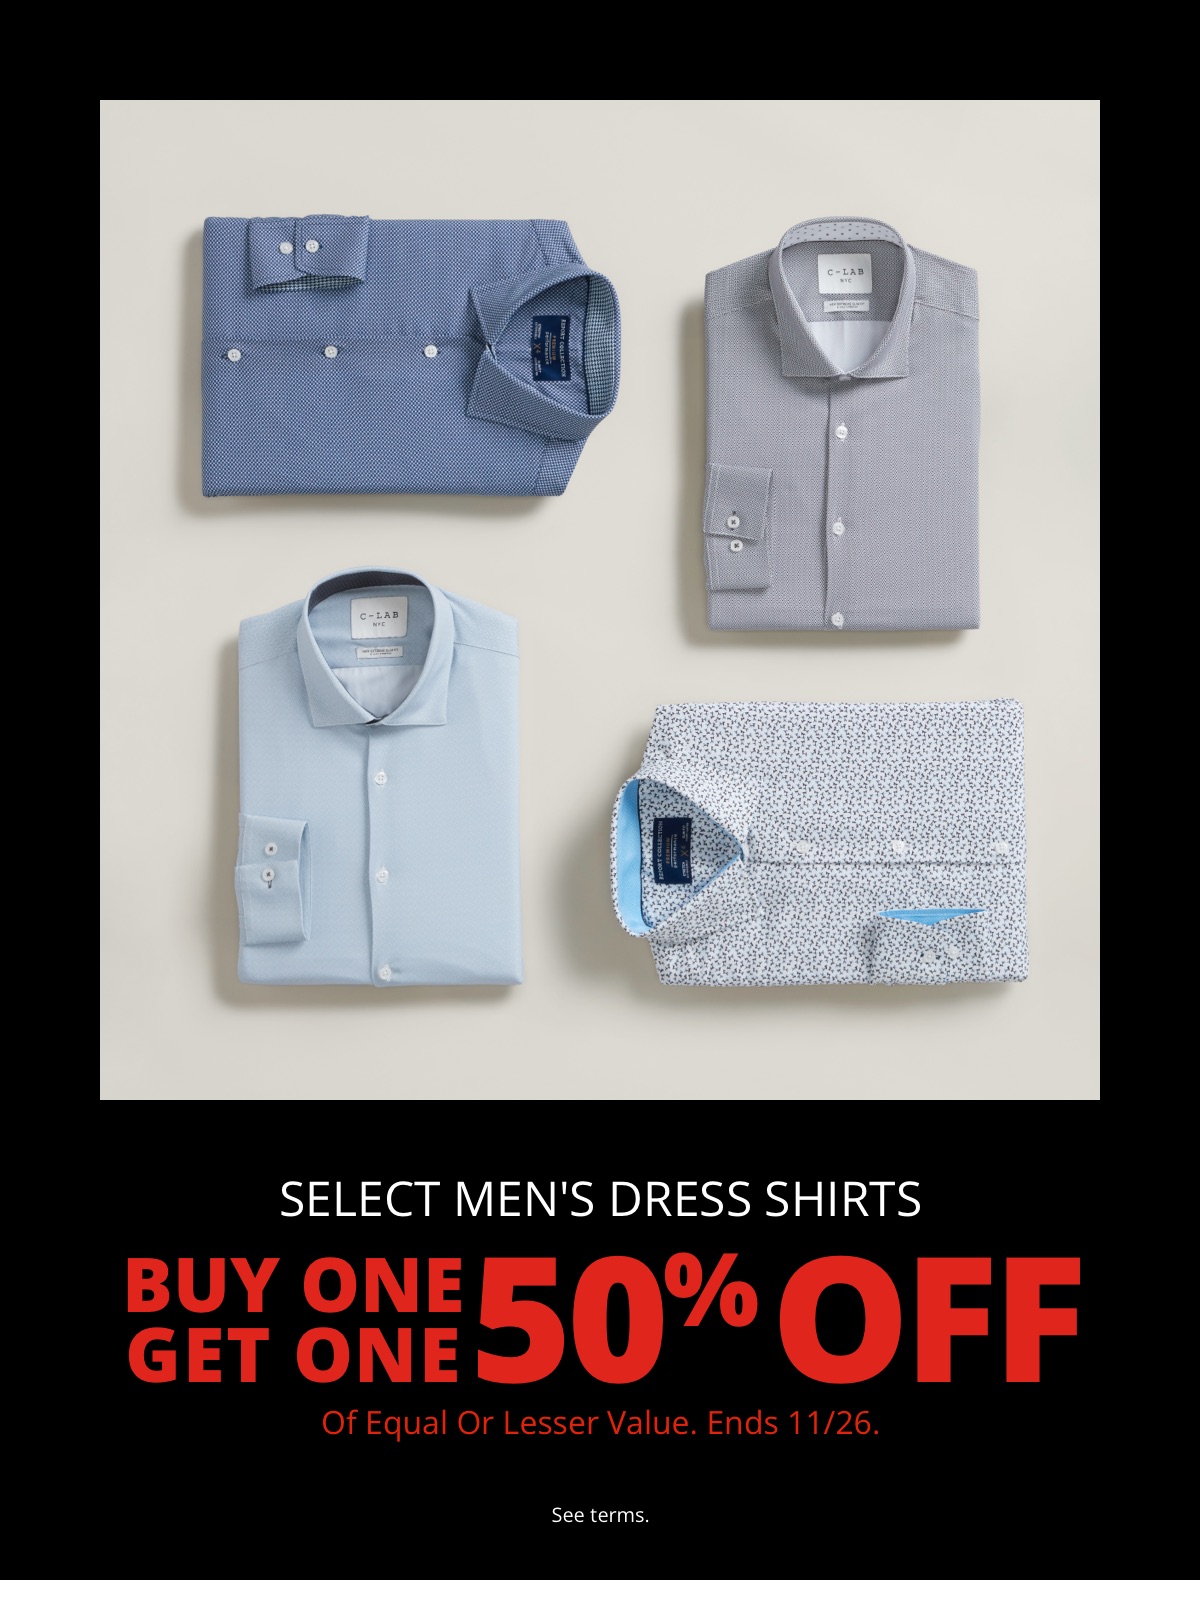 Select Mens Dress Shirts|Buy One Get One 50% Off|Of Equal or Lesser Value. Ends 11/26.|See terms.